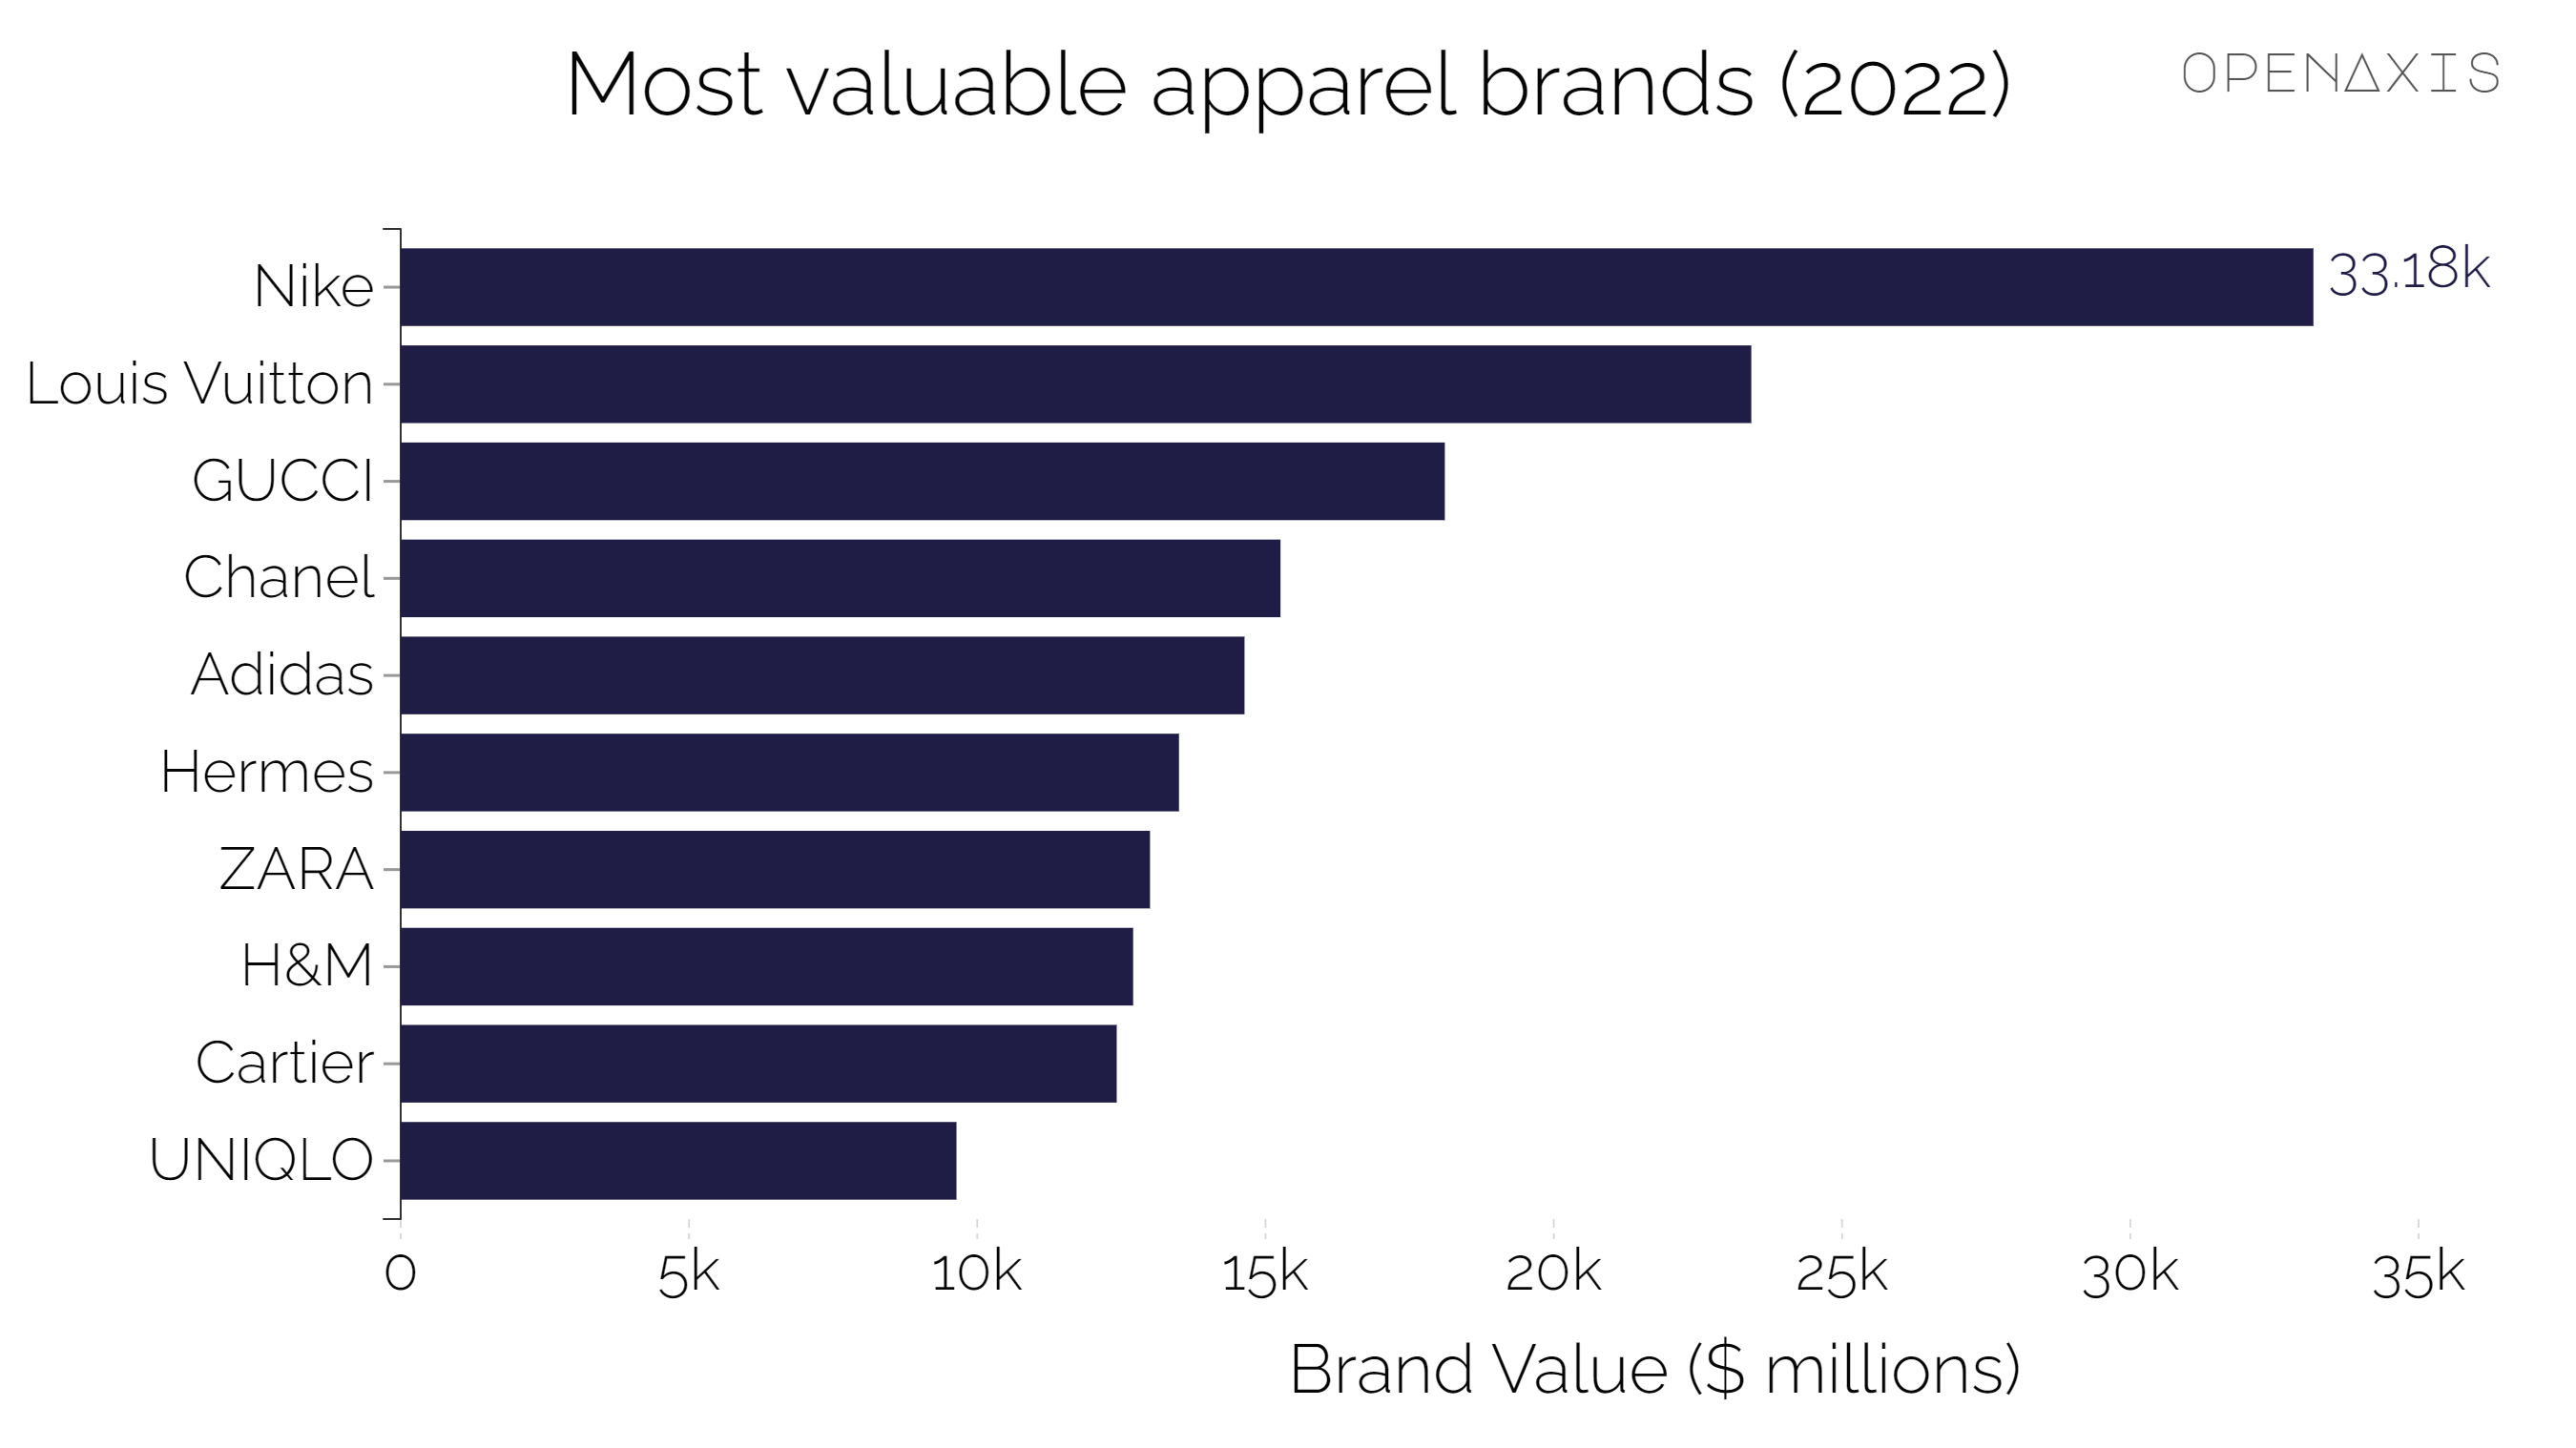 "Most valuable apparel brands (2022)"